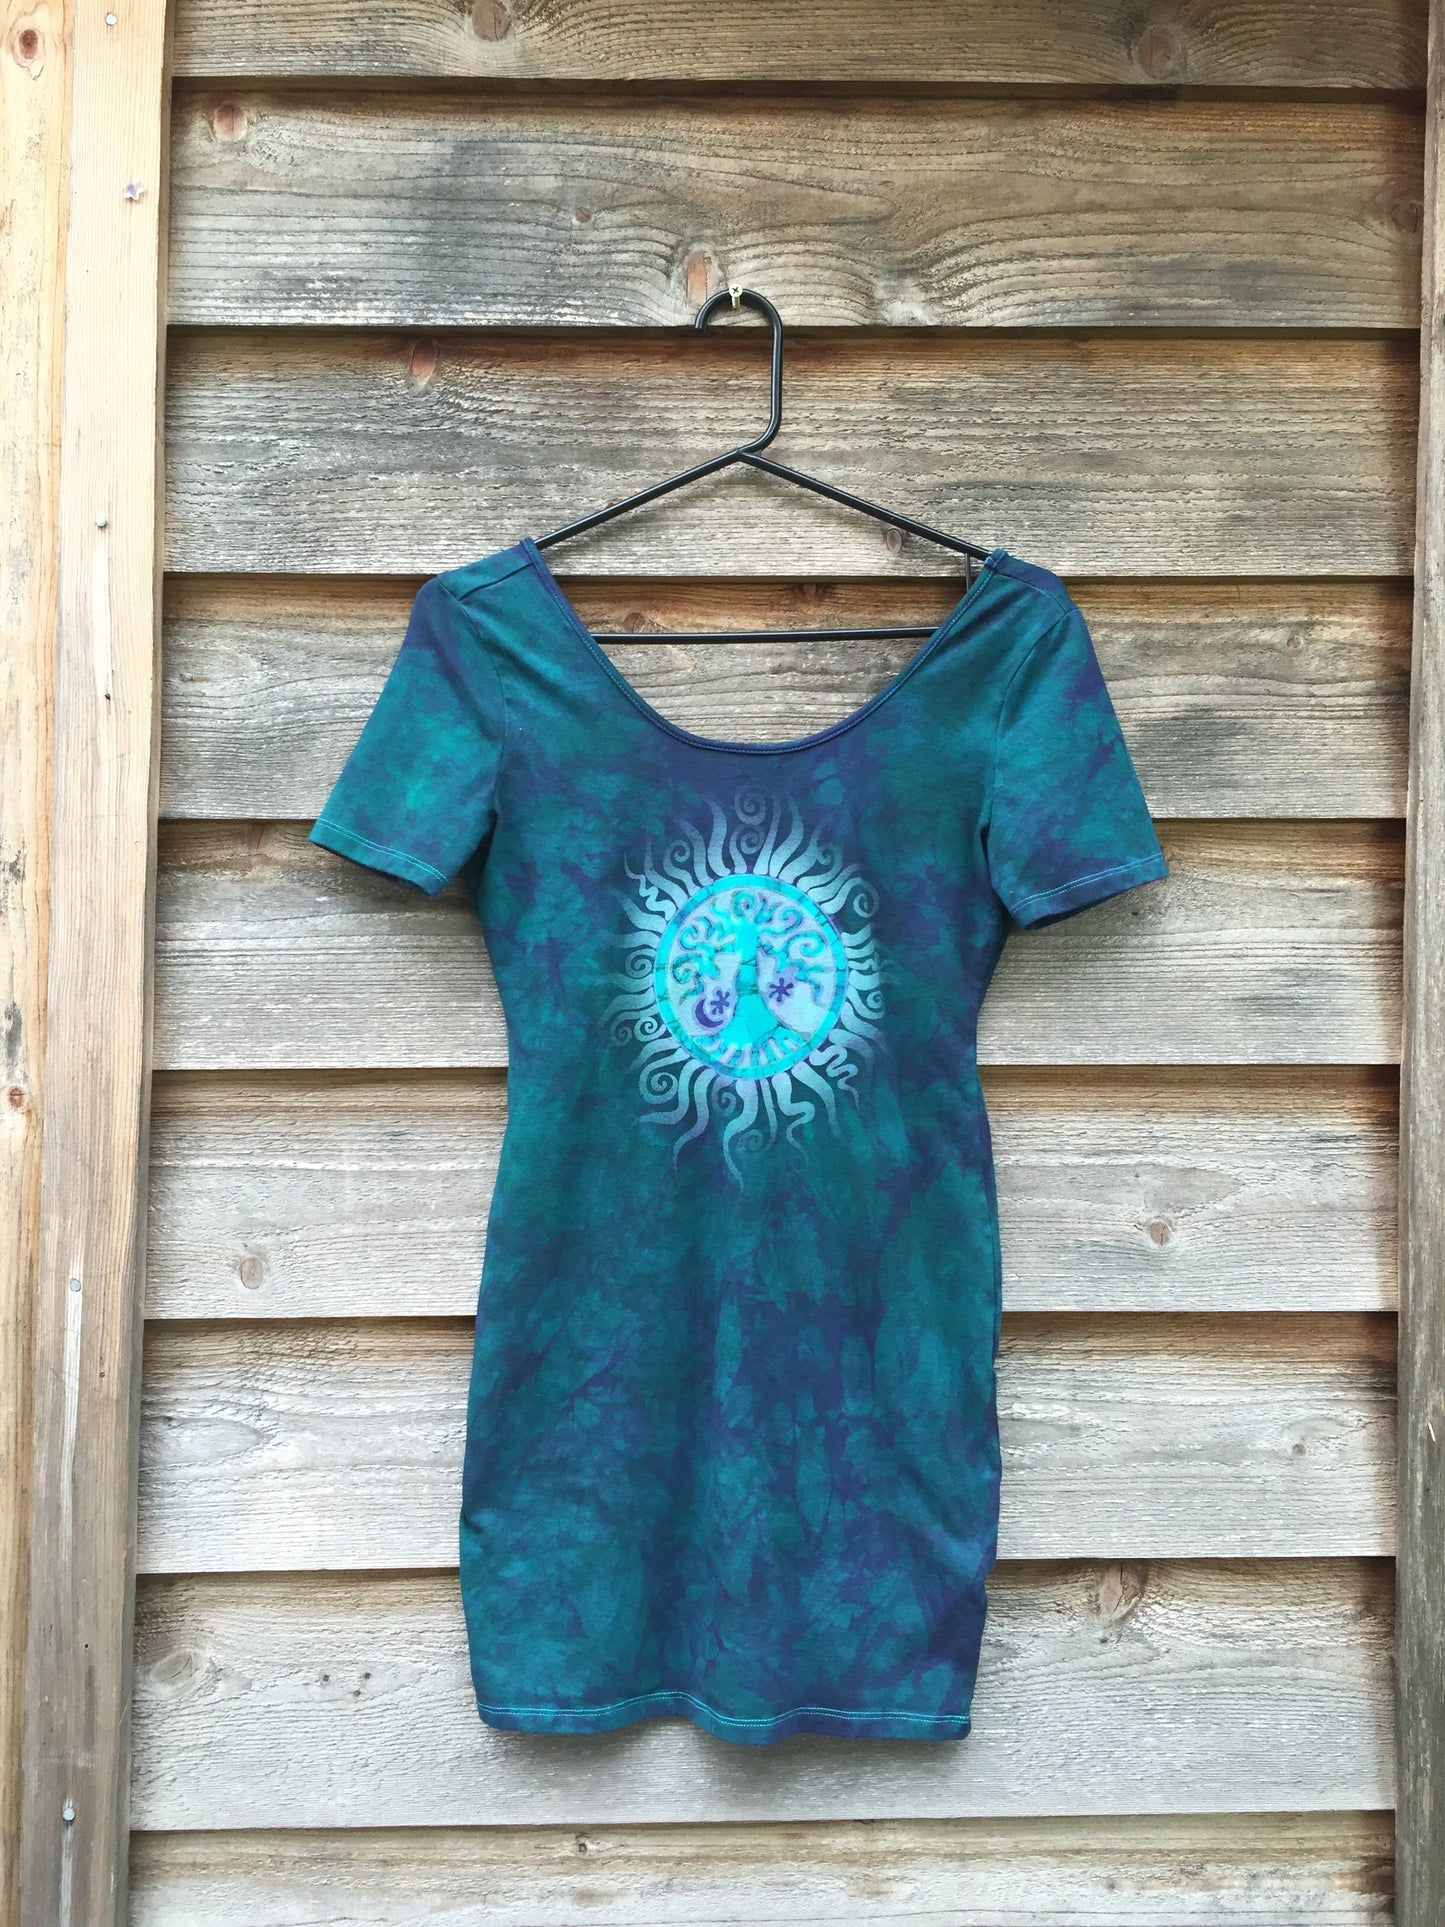 Teal Tree of Life Stretchy Long Tunic Tee - Size Medium ONLY